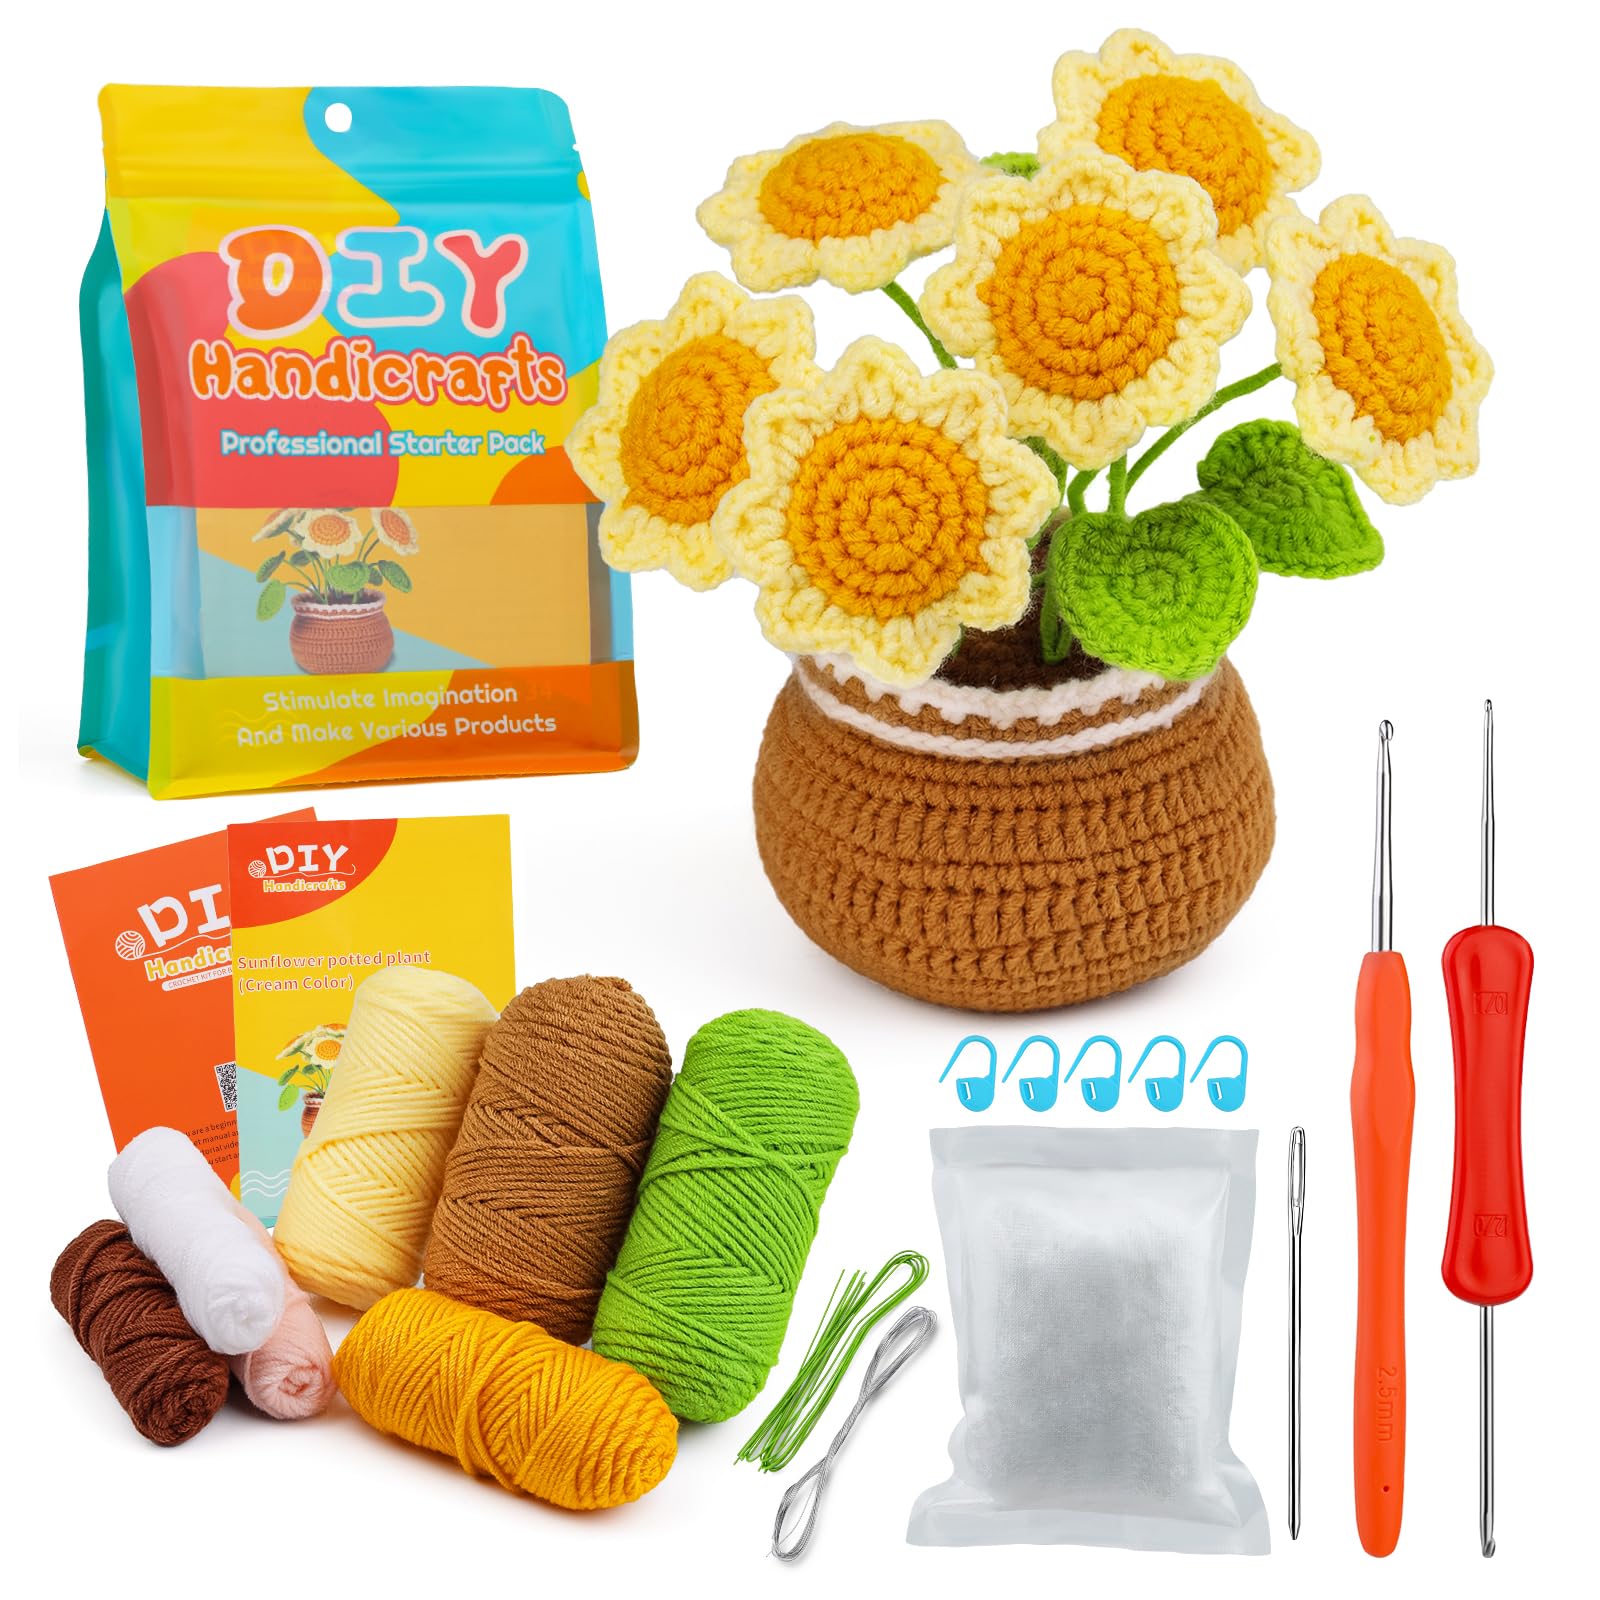 UzecPk Beginners Crochet Kit, Cute Flower Crochet Kit for Beginers and  Experts, All in One Crochet Knitting Kit with Step-by-Step Instructions  Video(Sunflower) 